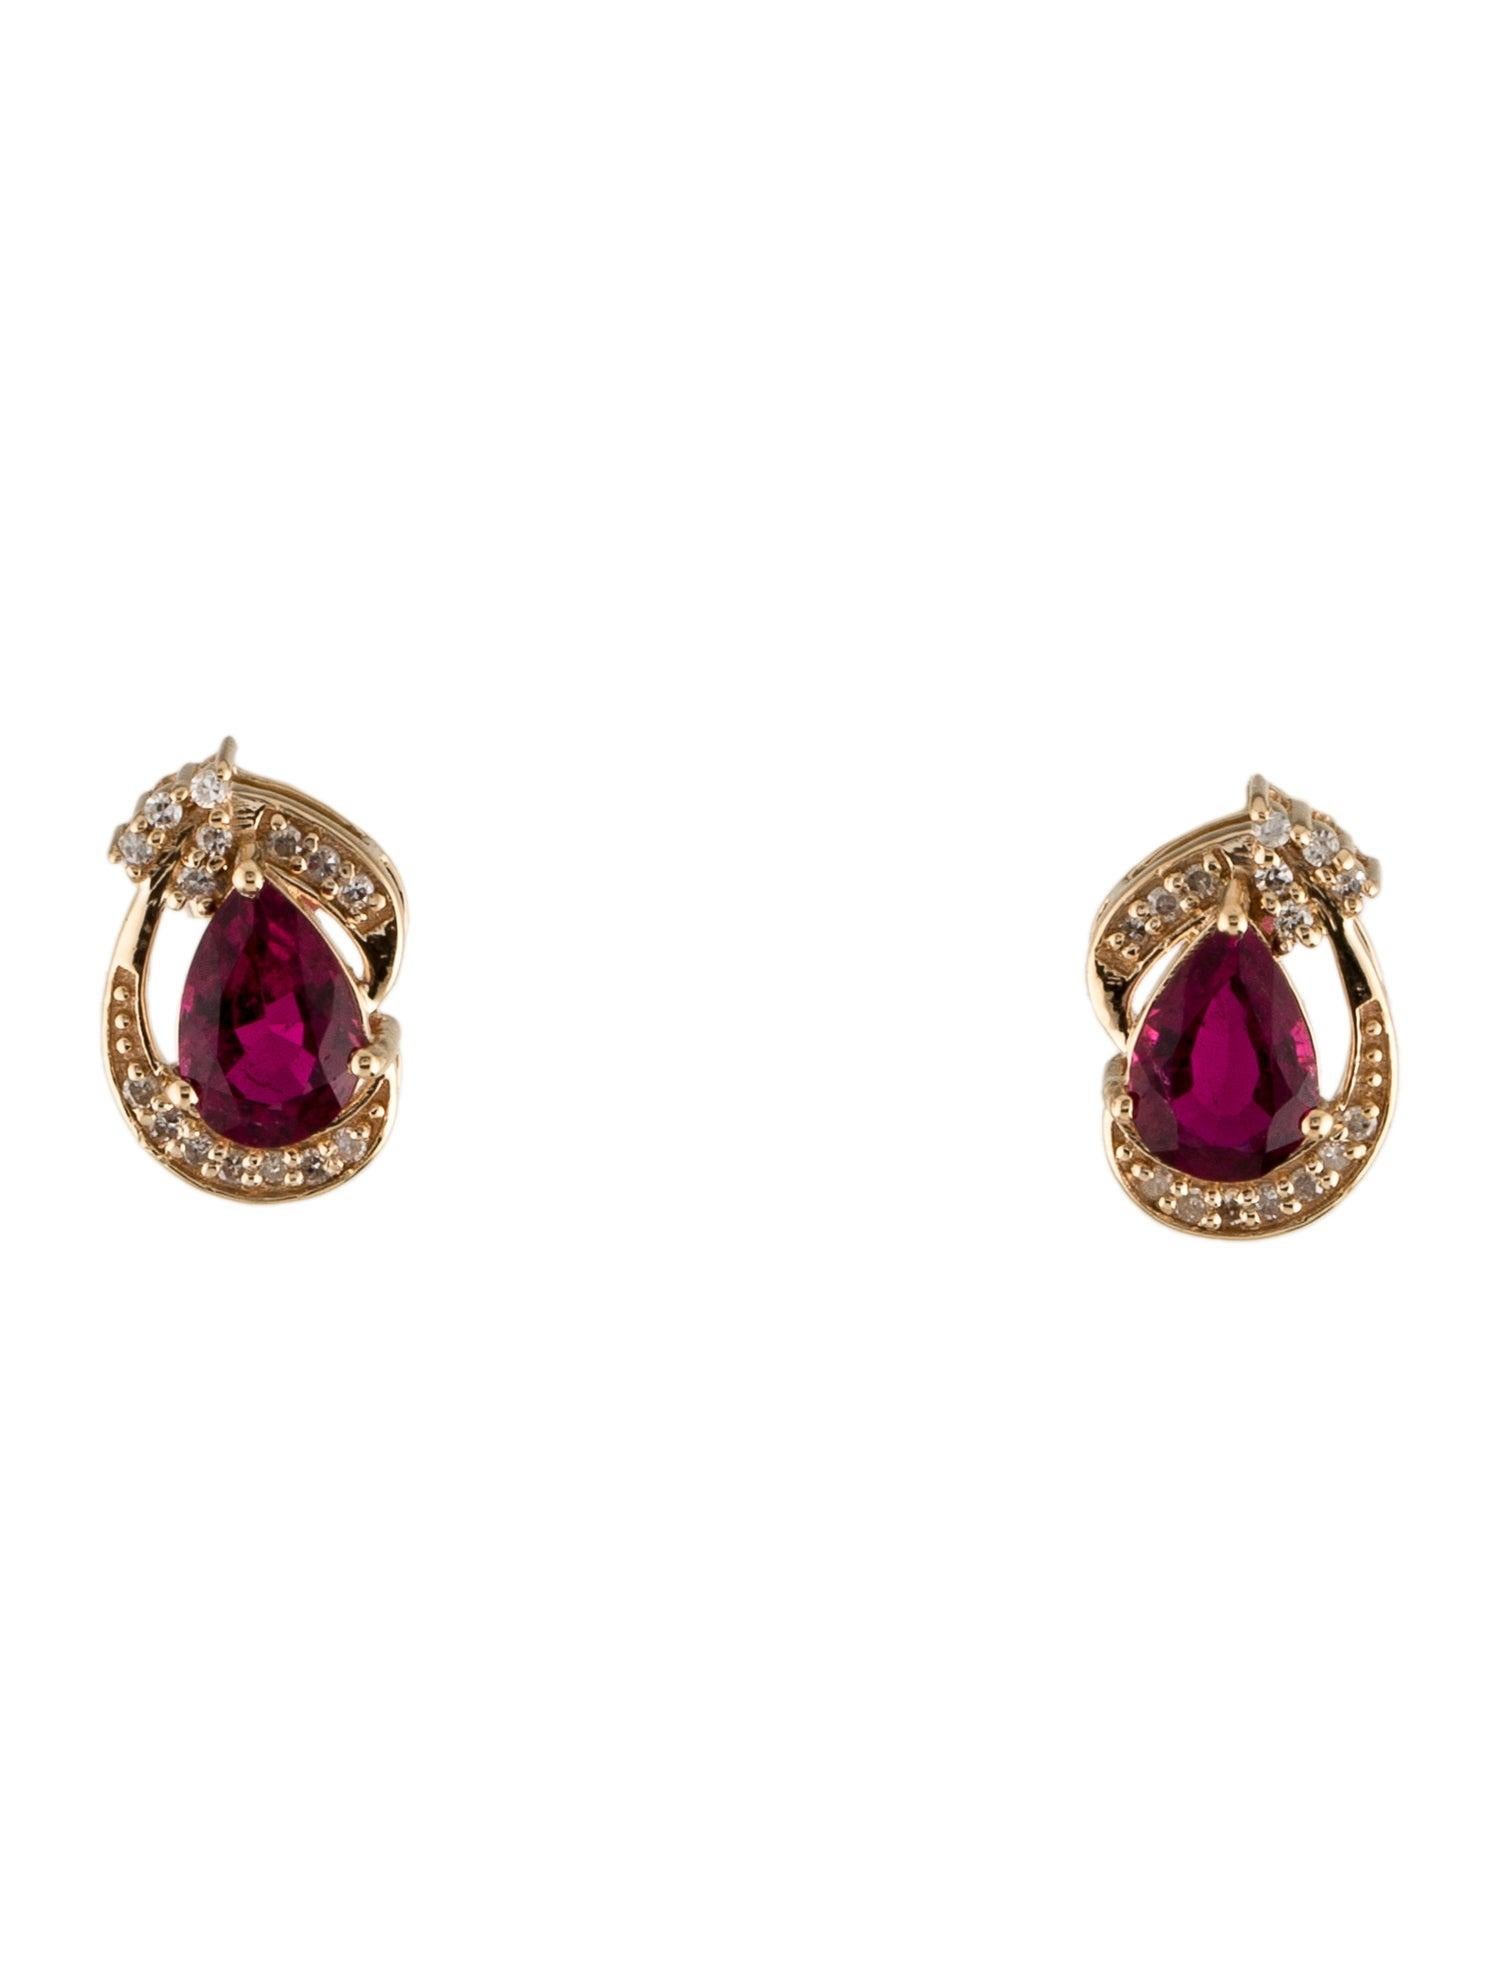 Indulge in the mesmerizing allure of our Rose Radiance earrings from the Vibrant Pink Treasures collection, where the profound beauty of the Rubellite meets the timeless sparkle of diamonds. Immerse yourself in the rich heritage of Jeweltique as we